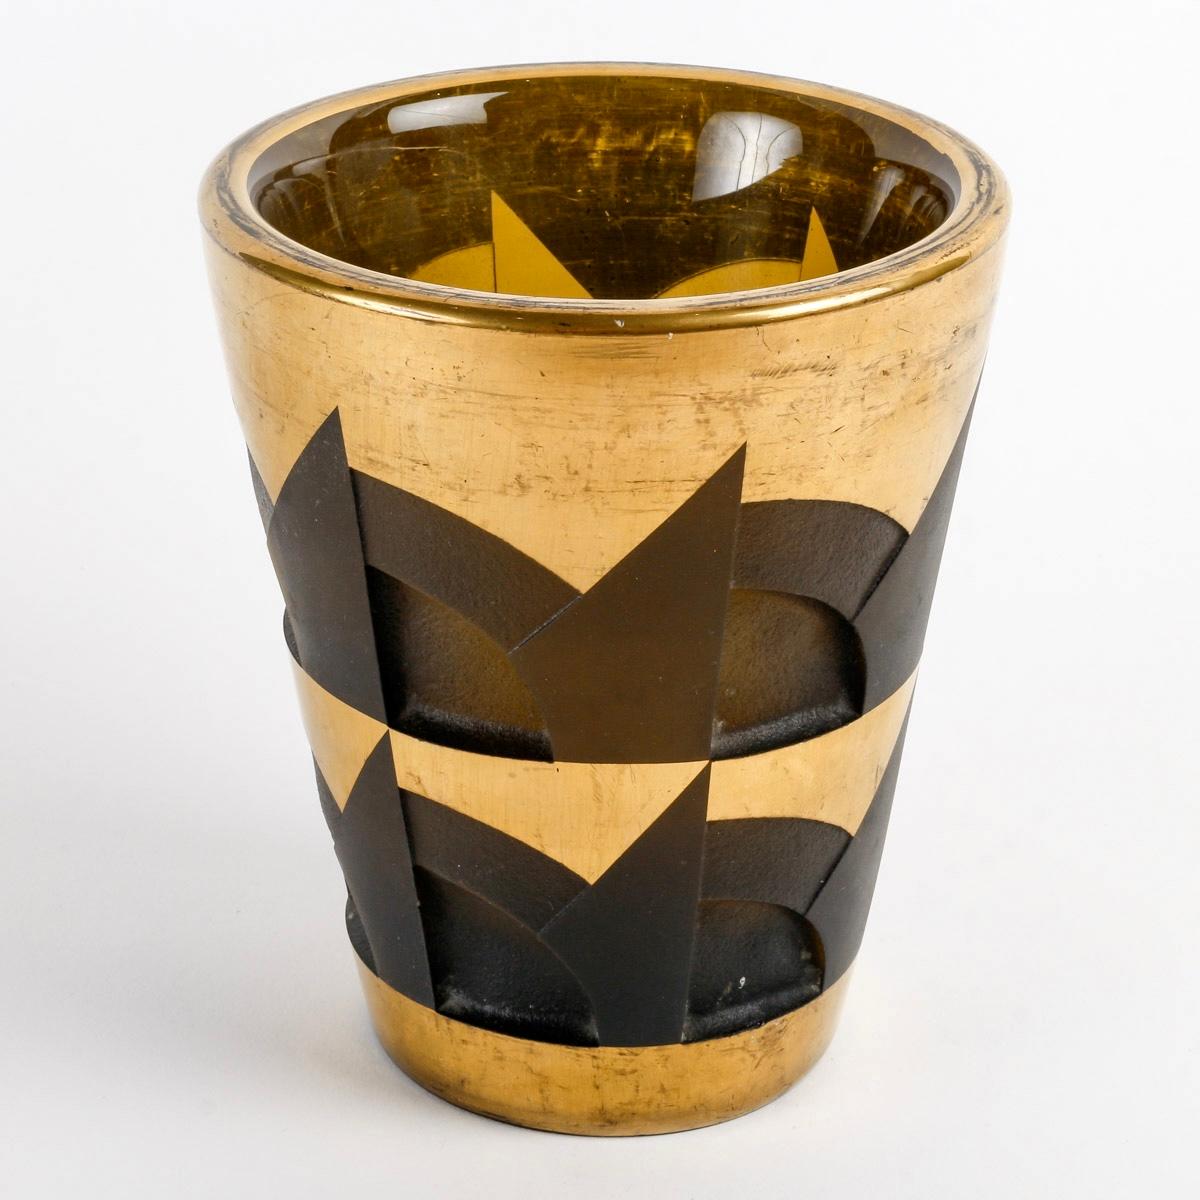 Vase Art Deco Modernist made in smoked topaz etched glass with gold enamel by Jean Luce in 1930s.
Stamped signature on bottom.

Perfect condition. Very rare model. 
Exceptional piece. 

Typically Art-Deco Modernist.

height : 16,2 cm 